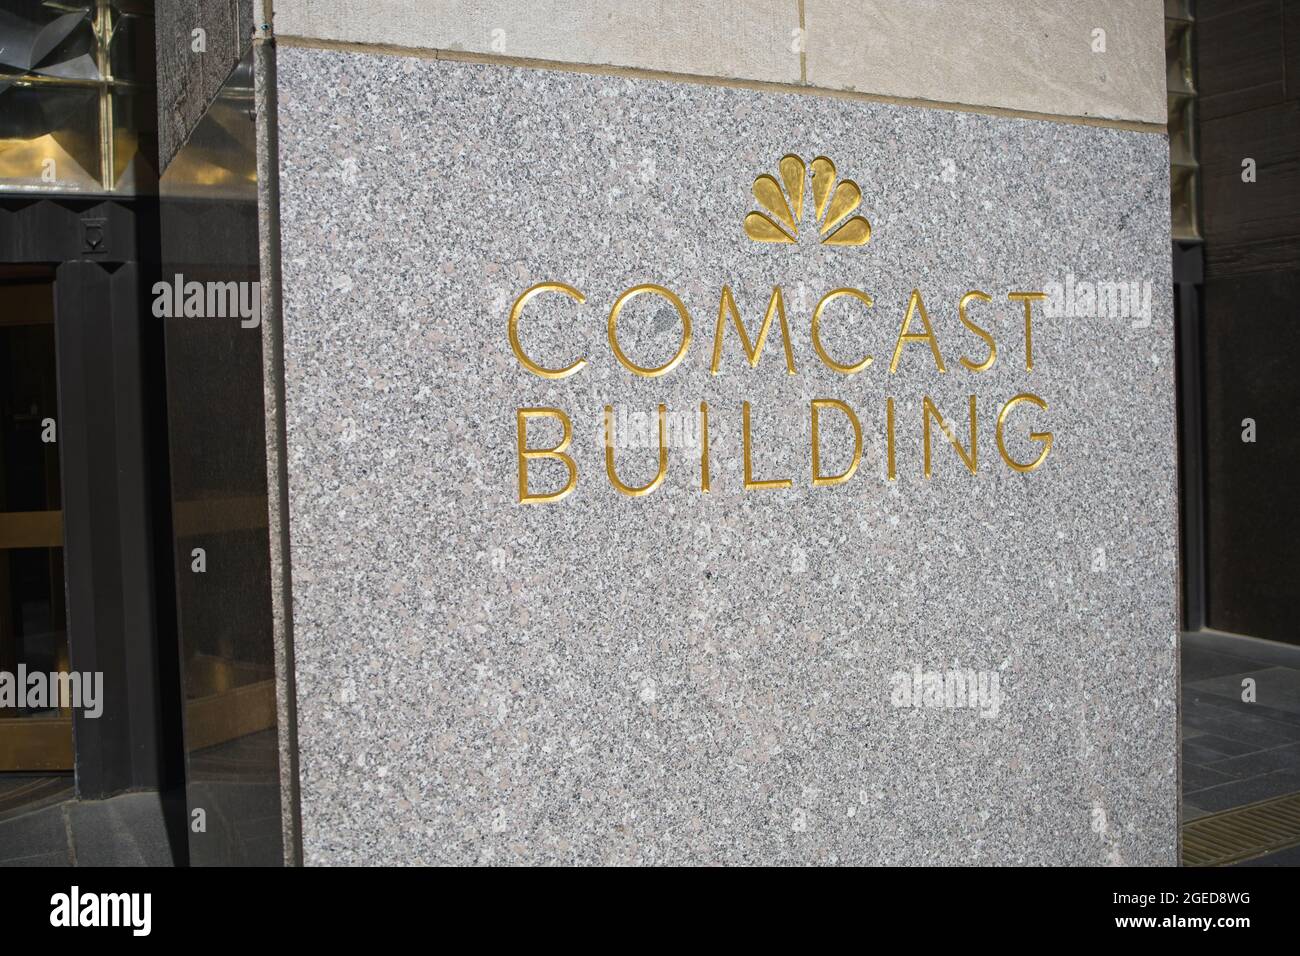 New York, NY, USA - 19. Aug 2021: Comcast Building Cornerstone at Rockefeller Center (formerly RCA and GE Building). Stockfoto